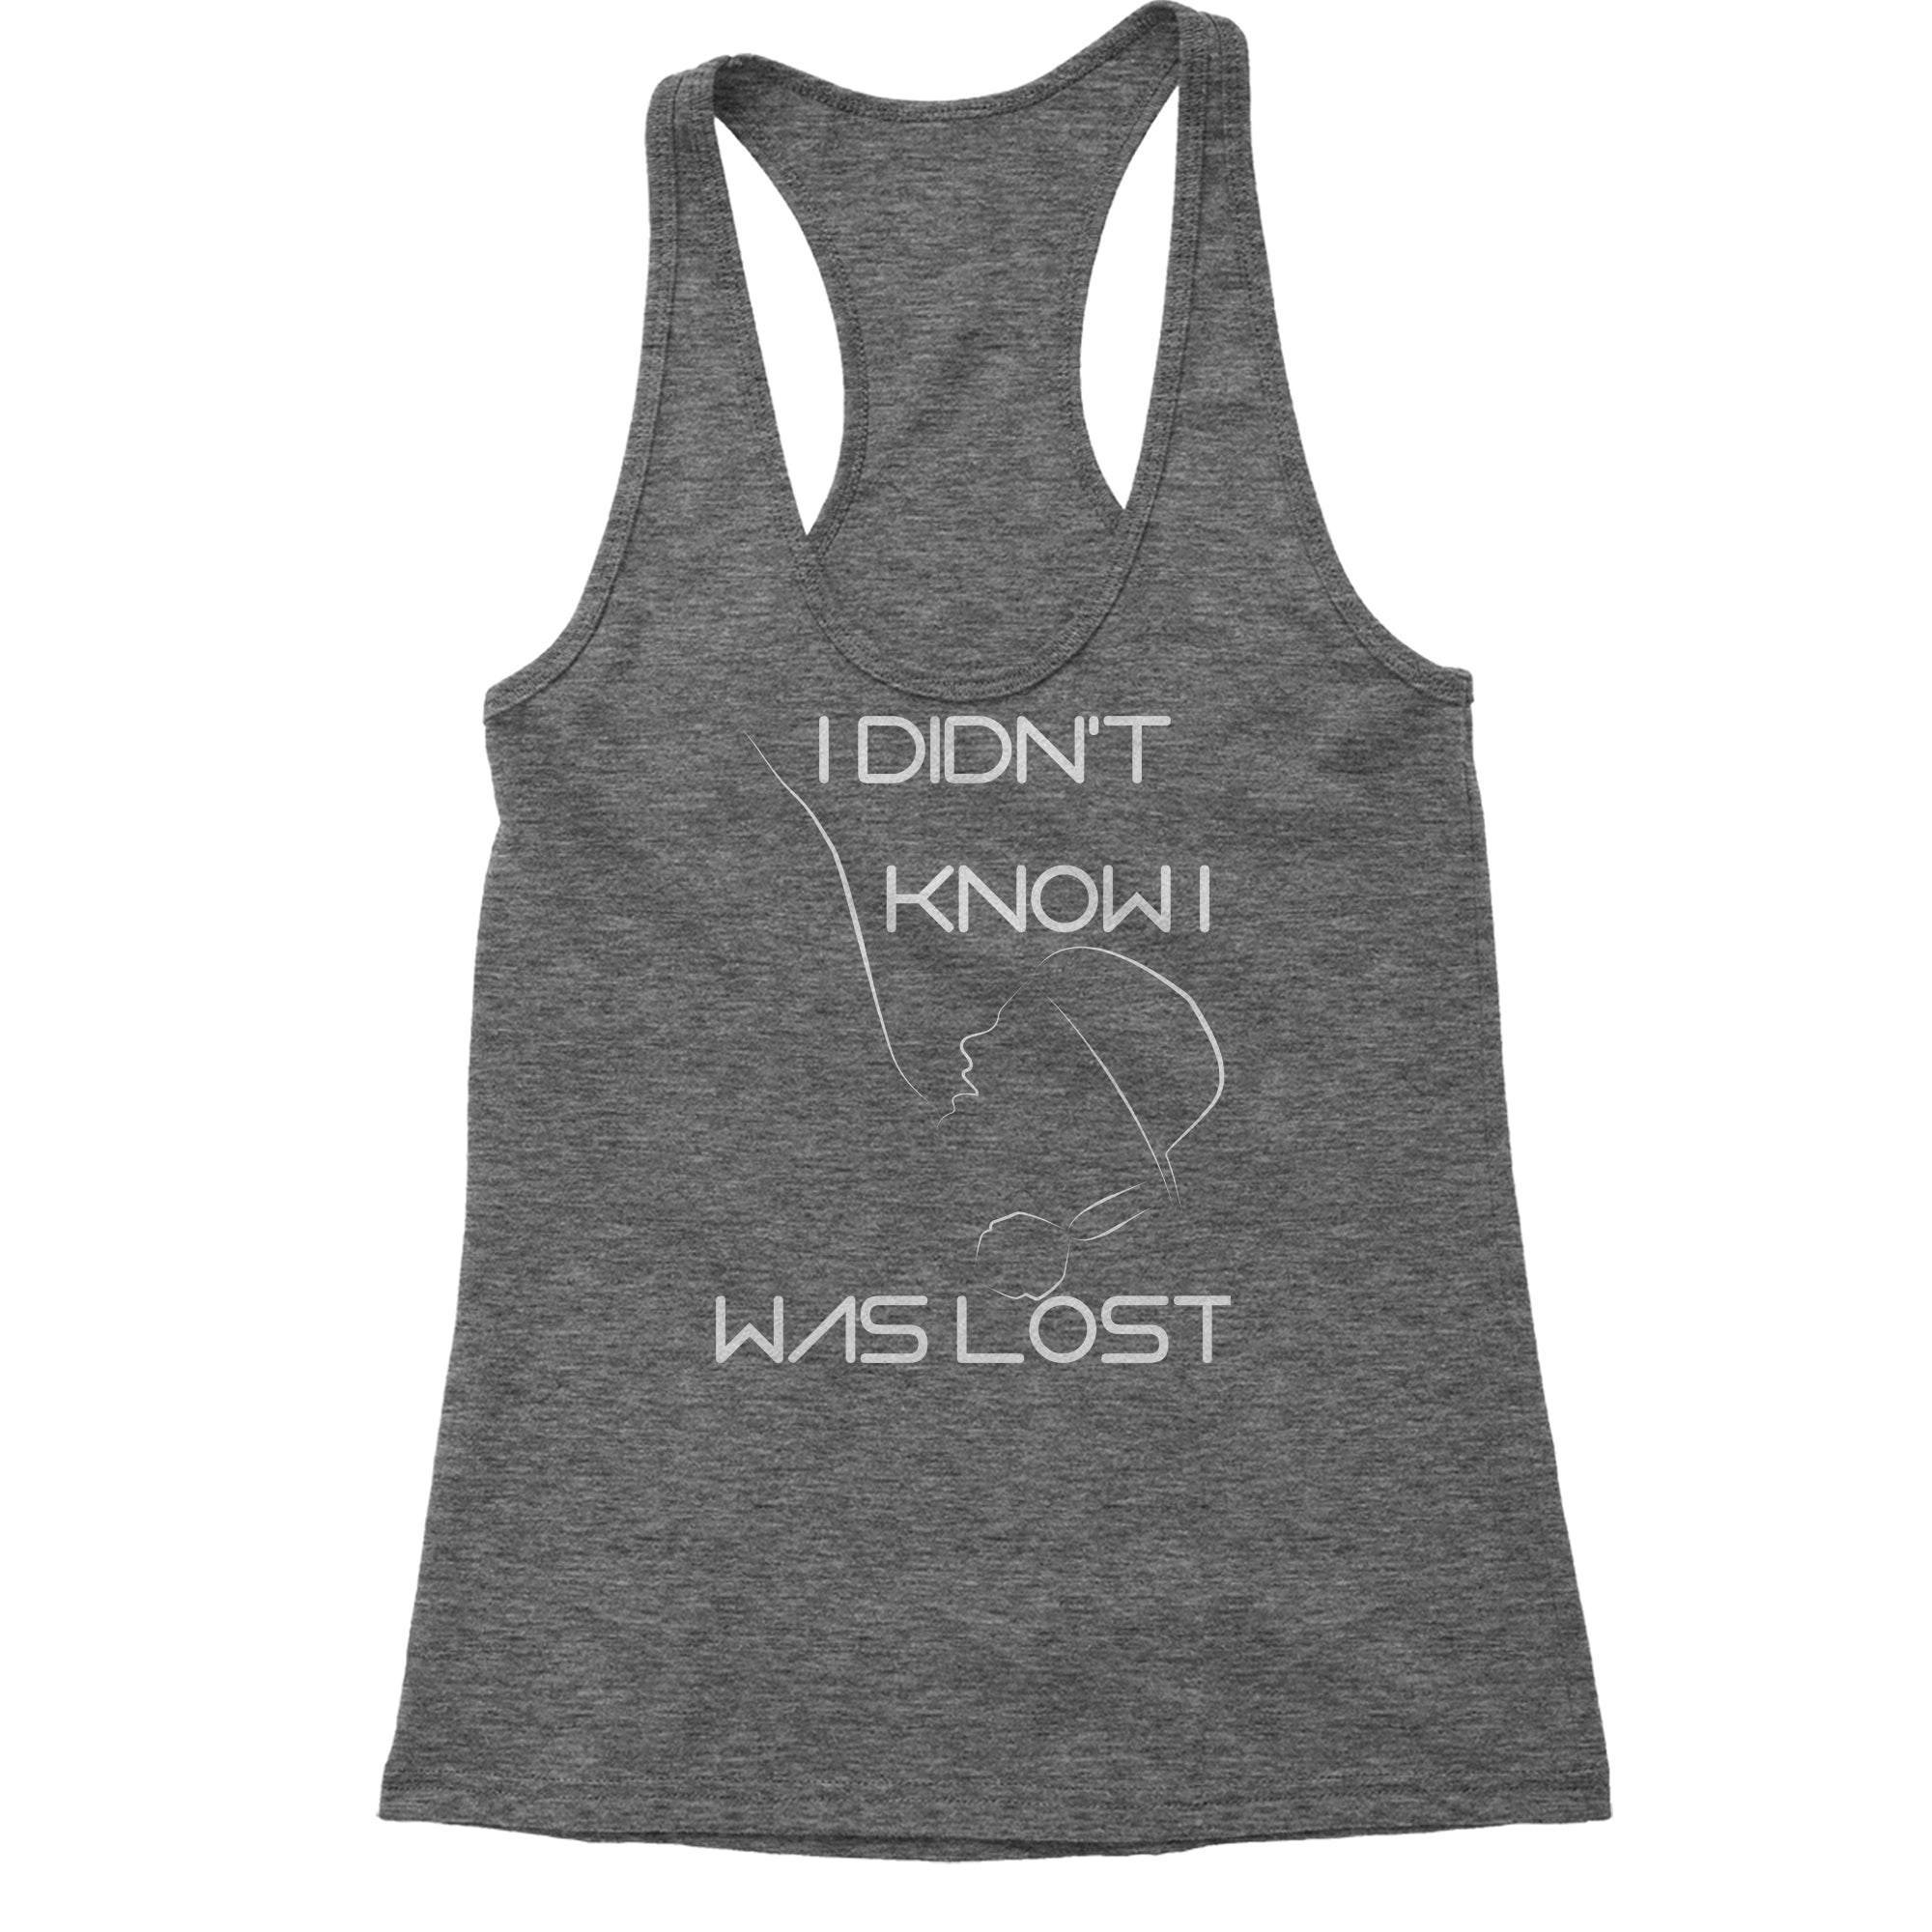 I Didn't Know I Was Lost Tribute To Bergling Women's Racerback Tank